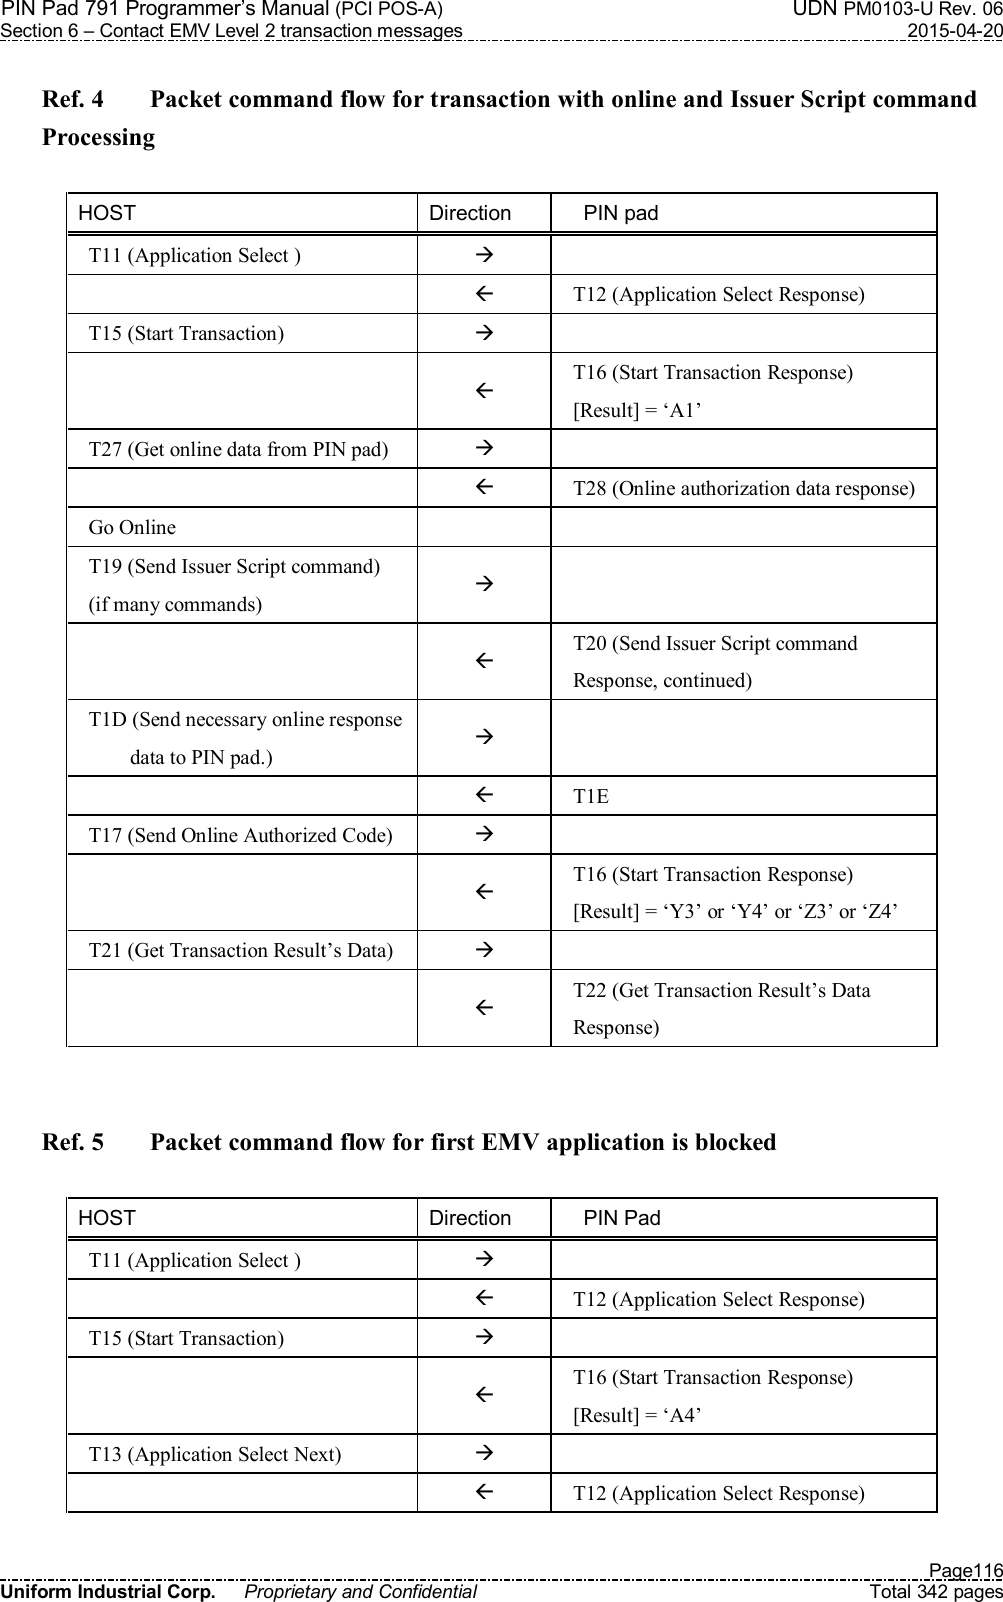 PIN Pad 791 Programmer’s Manual (PCI POS-A)  UDN PM0103-U Rev. 06 Section 6 – Contact EMV Level 2 transaction messages  2015-04-20   Page116 Uniform Industrial Corp.  Proprietary and Confidential  Total 342 pages  Ref. 4  Packet command flow for transaction with online and Issuer Script command Processing  HOST  Direction      PIN pad T11 (Application Select )      T12 (Application Select Response) T15 (Start Transaction)      T16 (Start Transaction Response) [Result] = ‘A1’ T27 (Get online data from PIN pad)      T28 (Online authorization data response) Go Online     T19 (Send Issuer Script command) (if many commands)     T20 (Send Issuer Script command Response, continued) T1D (Send necessary online response  data to PIN pad.)     T1E T17 (Send Online Authorized Code)      T16 (Start Transaction Response) [Result] = ‘Y3’ or ‘Y4’ or ‘Z3’ or ‘Z4’ T21 (Get Transaction Result’s Data)      T22 (Get Transaction Result’s Data Response)   Ref. 5  Packet command flow for first EMV application is blocked  HOST  Direction      PIN Pad T11 (Application Select )      T12 (Application Select Response) T15 (Start Transaction)      T16 (Start Transaction Response) [Result] = ‘A4’ T13 (Application Select Next)      T12 (Application Select Response) 